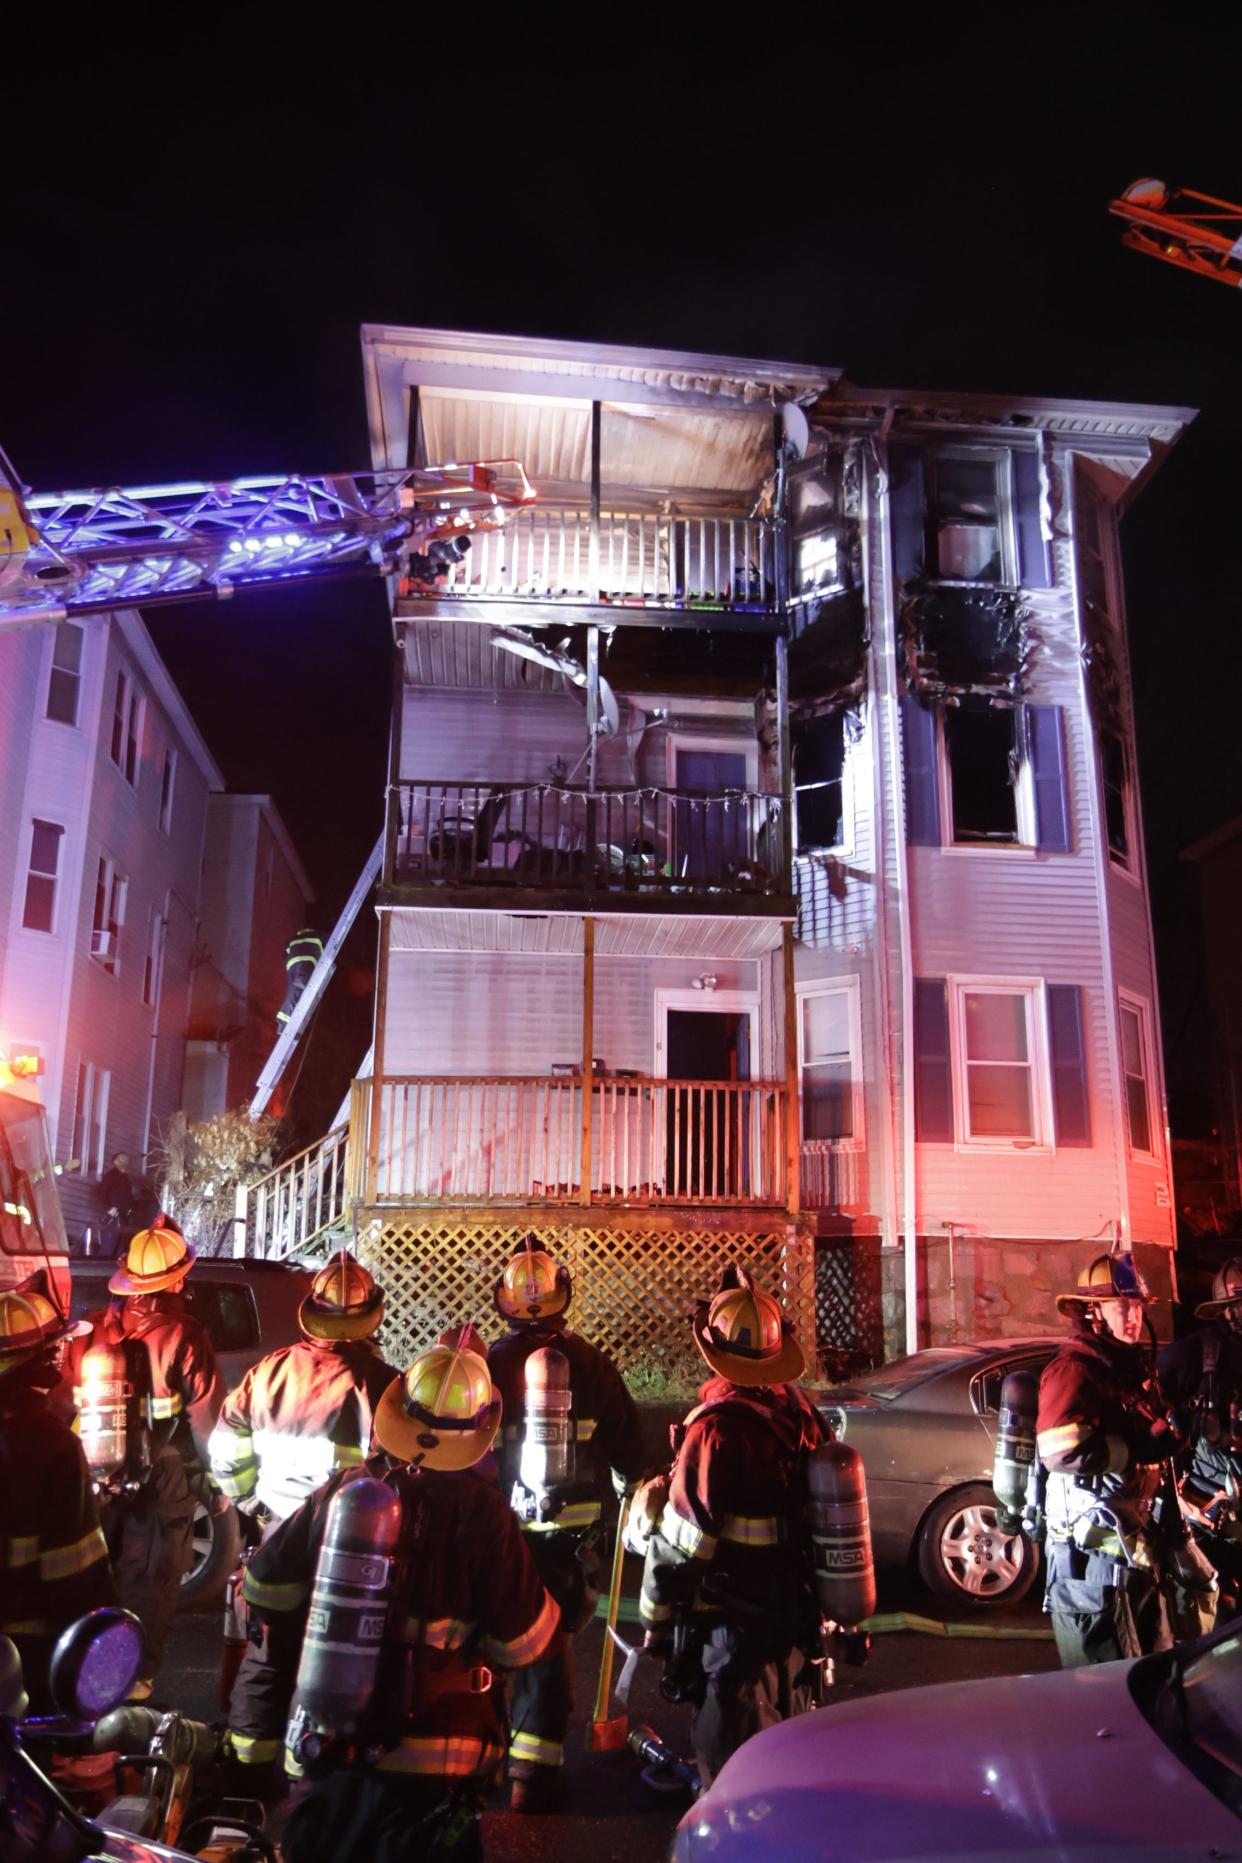 The fire damaged the upper floors of a three-decker residence on Moen Street in Worcester early Monday.